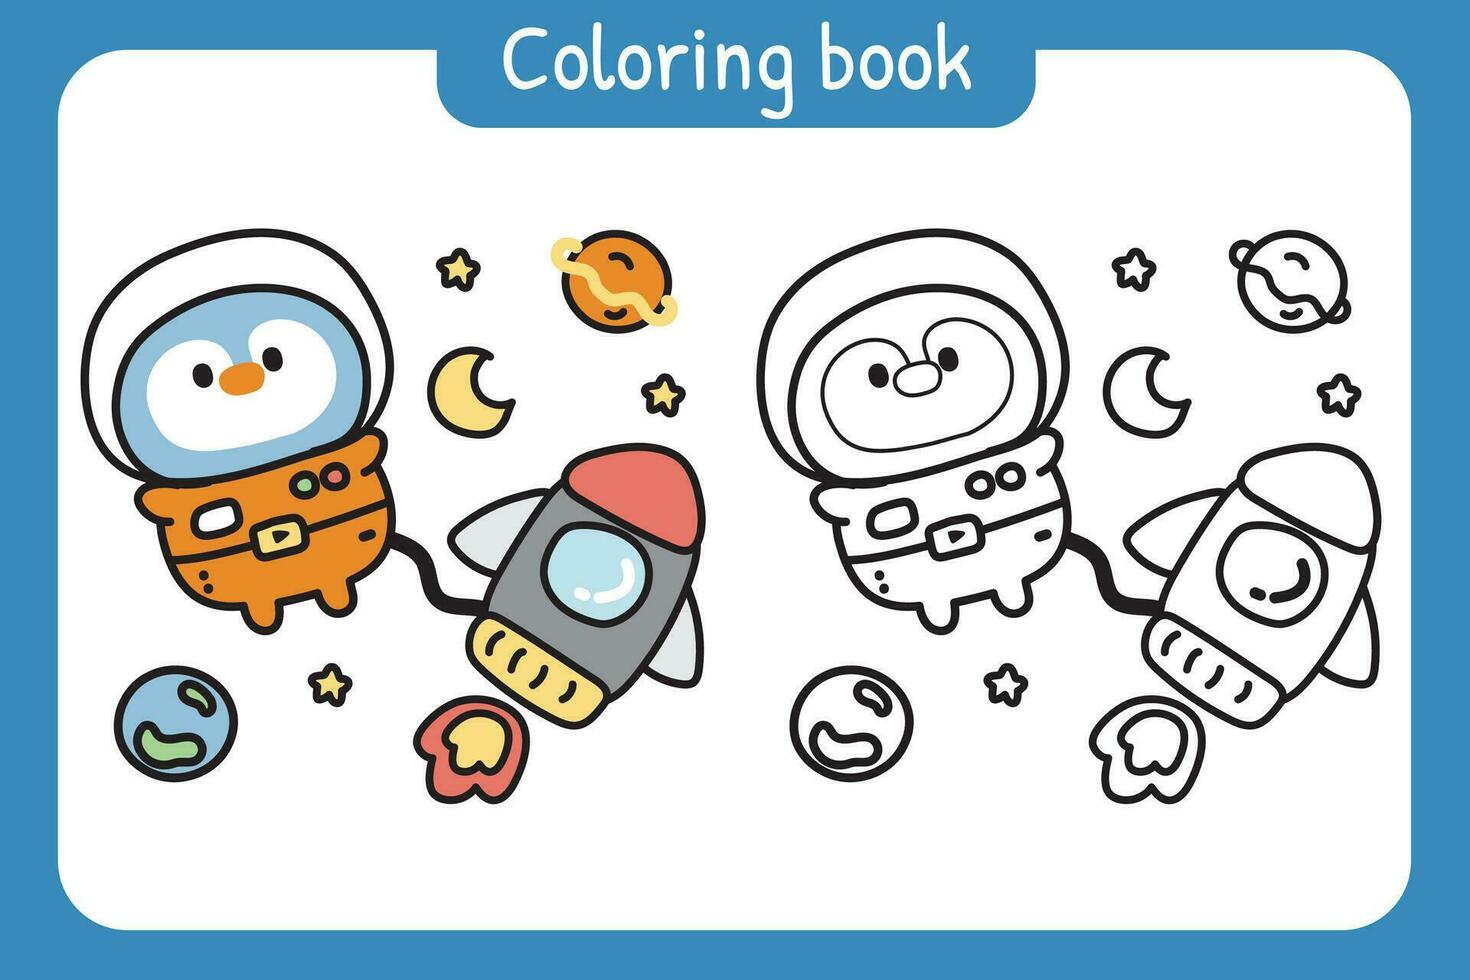 Coloring book.Painting book for kid.Cute penguin astronaut with rocket and planet. vector